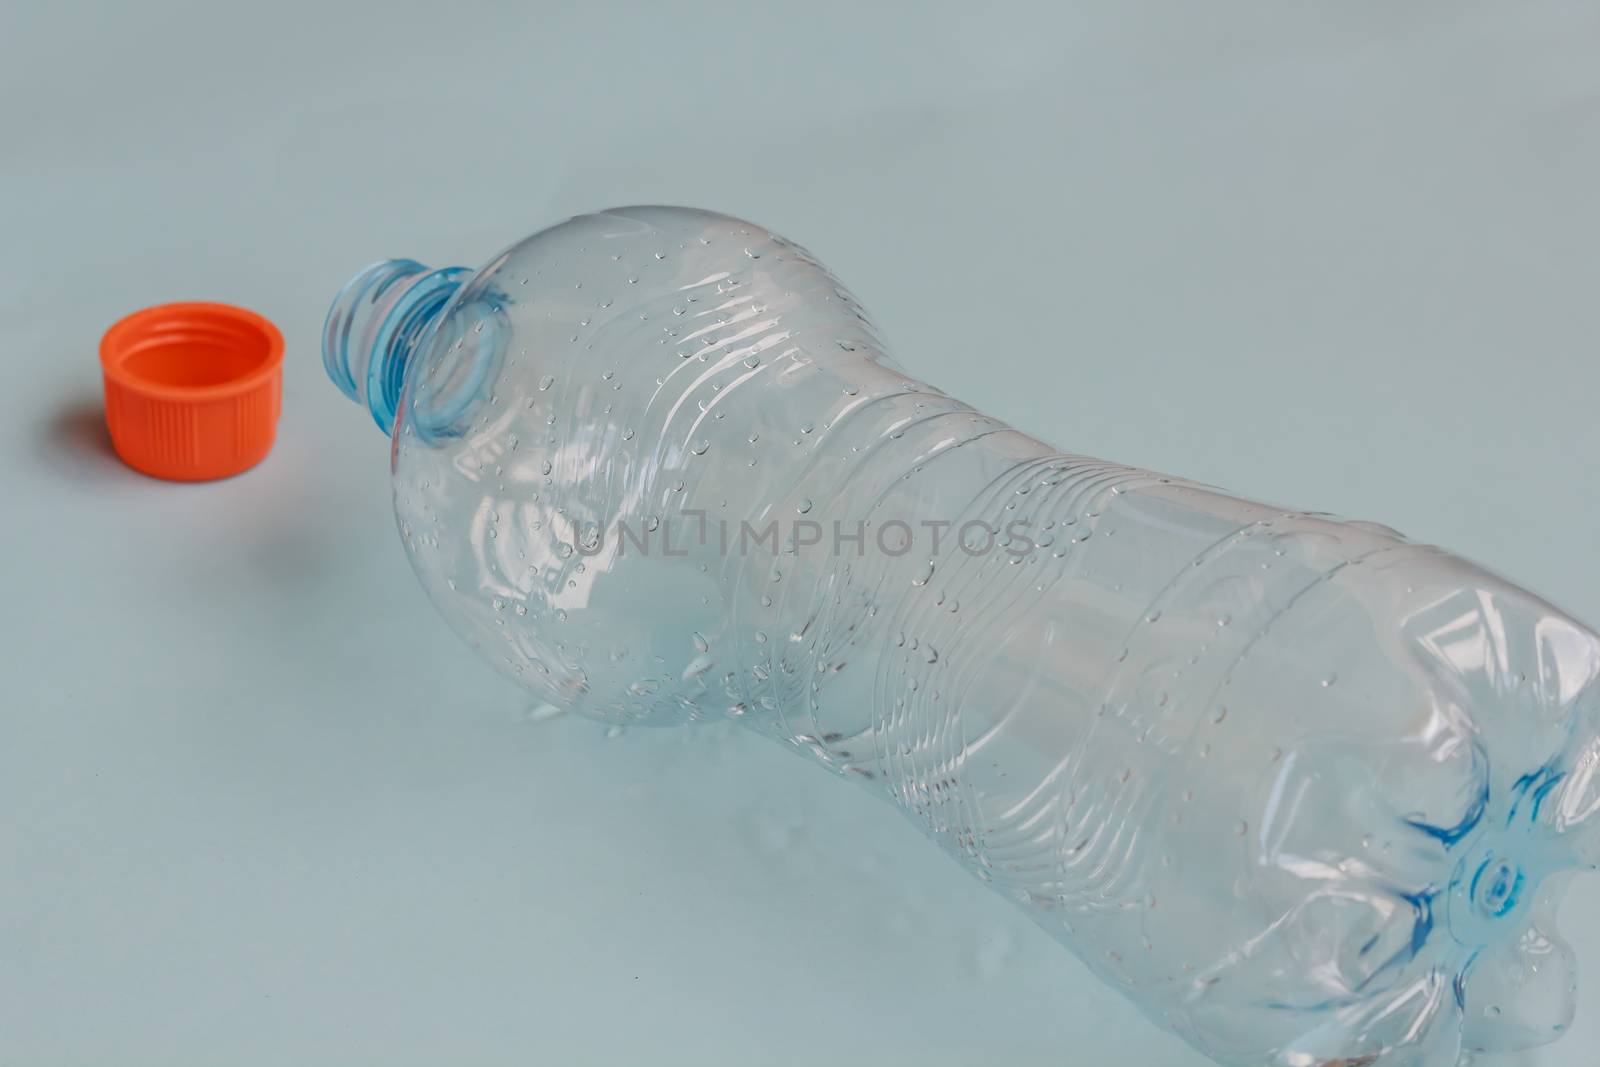 a bottle of fresh water emptied and abandoned